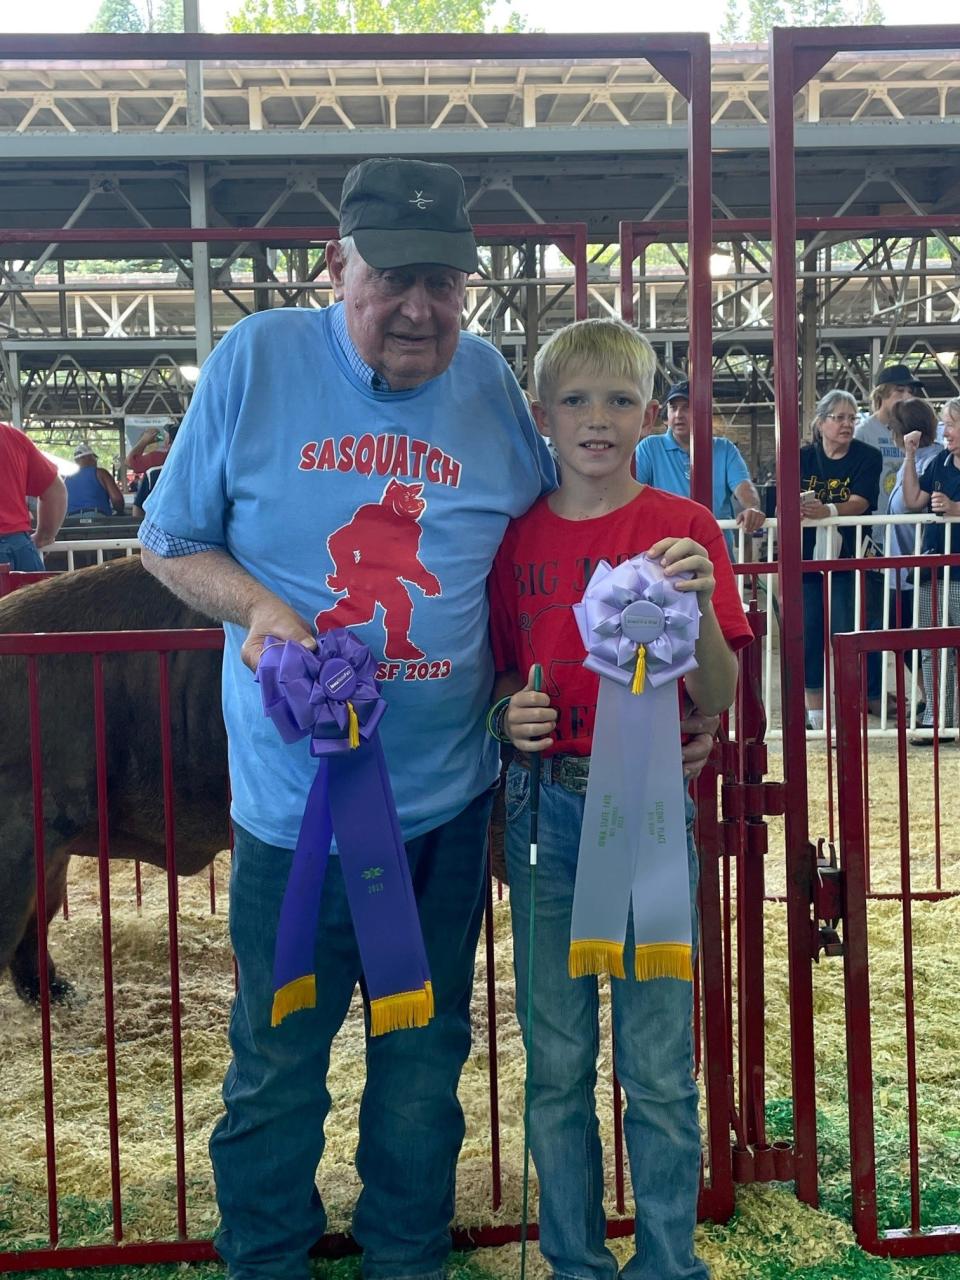 Wilbur Kehrli, whose family pig won Big Boar, poses with Jack Theobald, who represents the future of the contest.